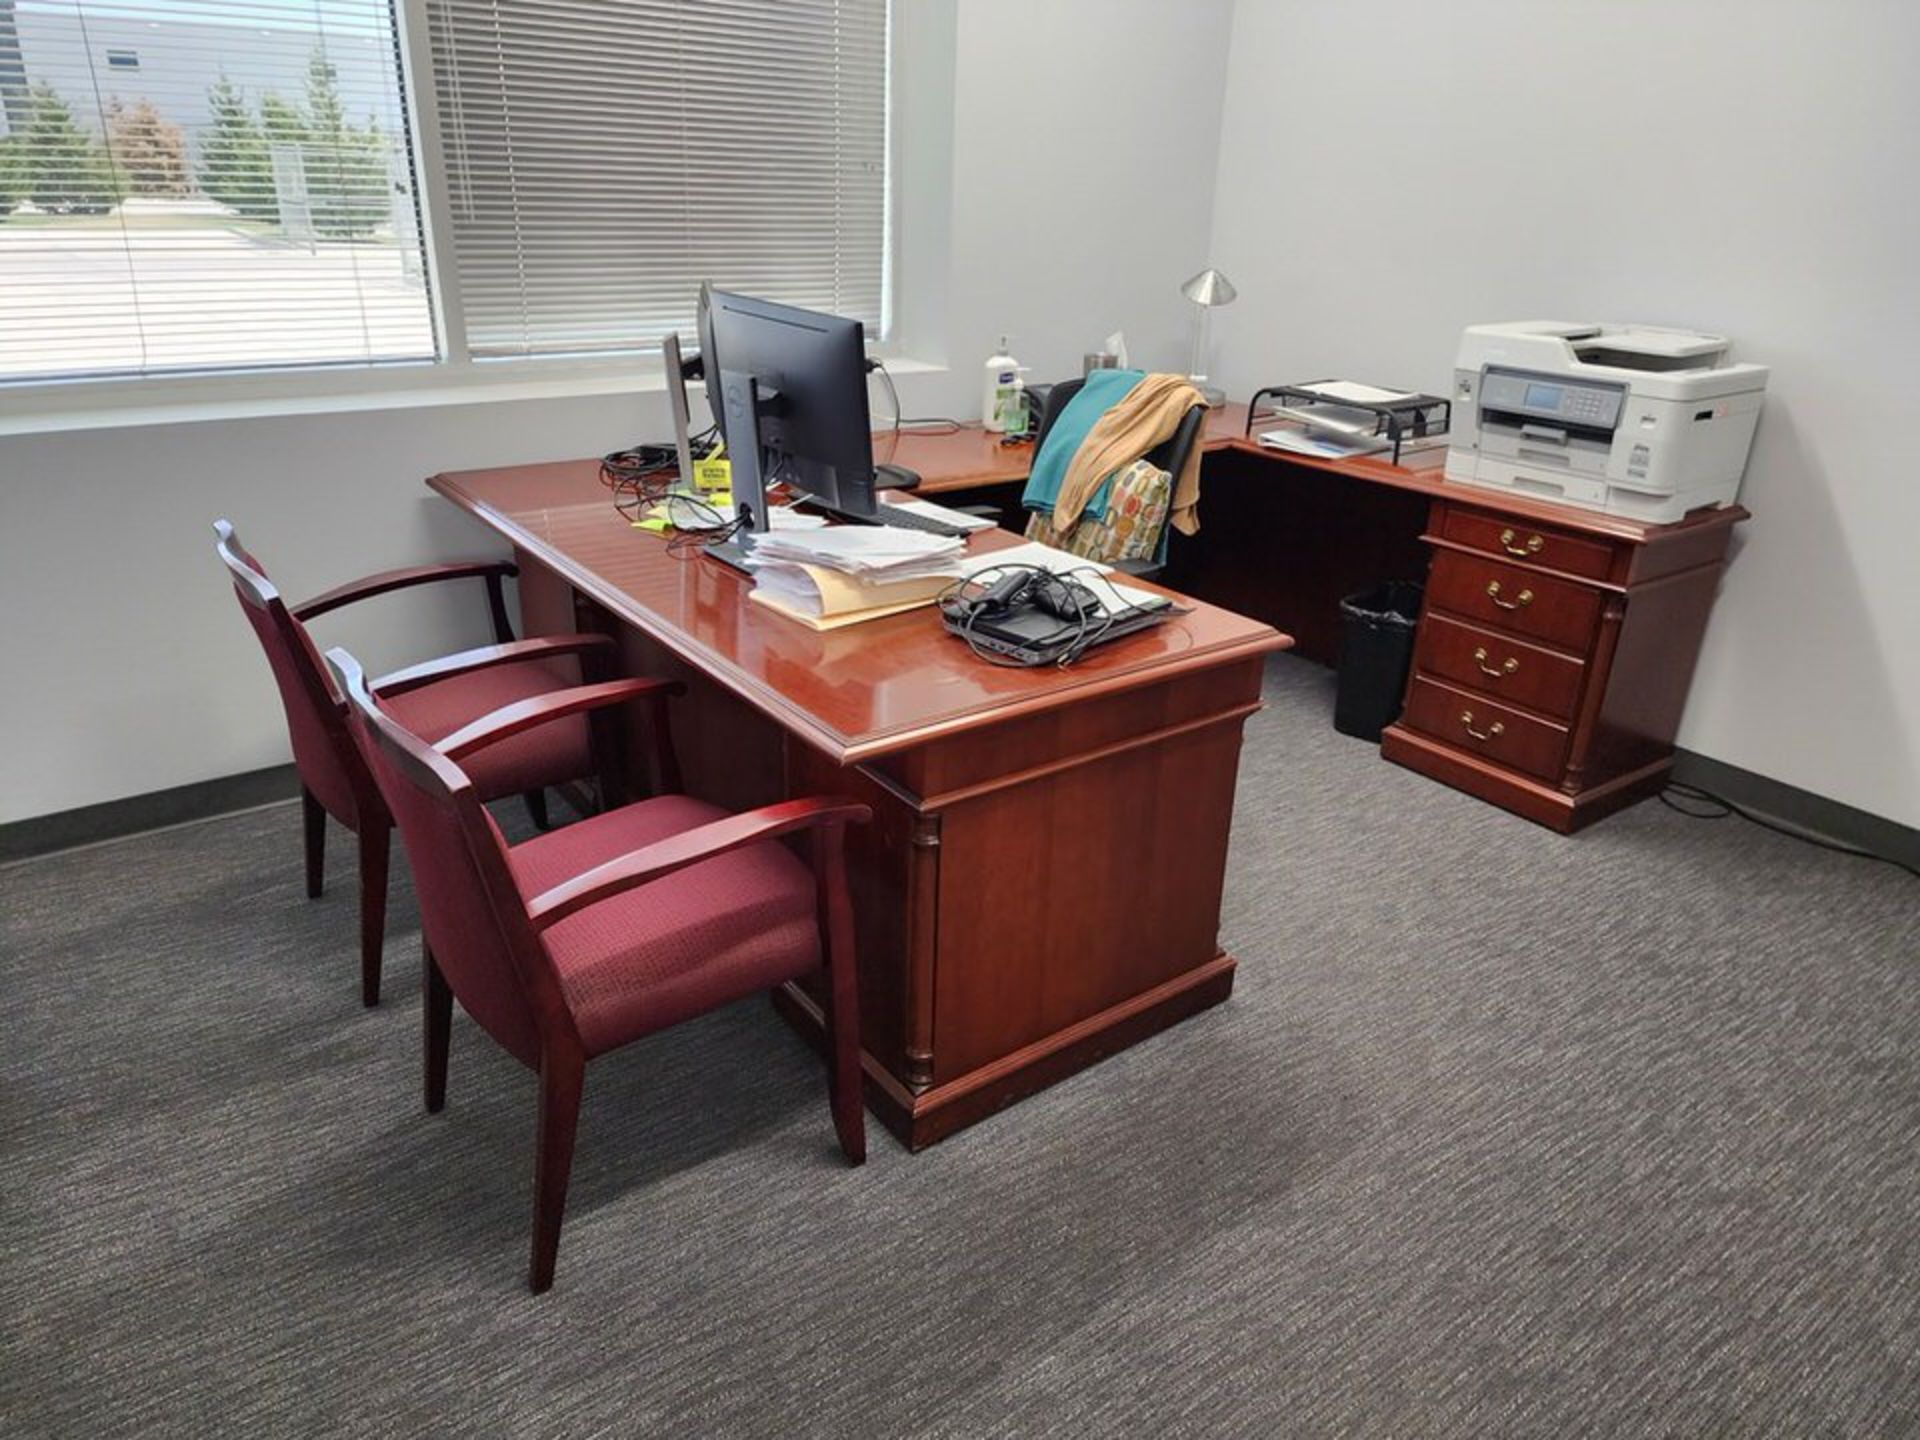 Office Furniture To Include But Not Limited To: Desk, Monitors, Keyboard & Mouse, etc. - Image 11 of 11